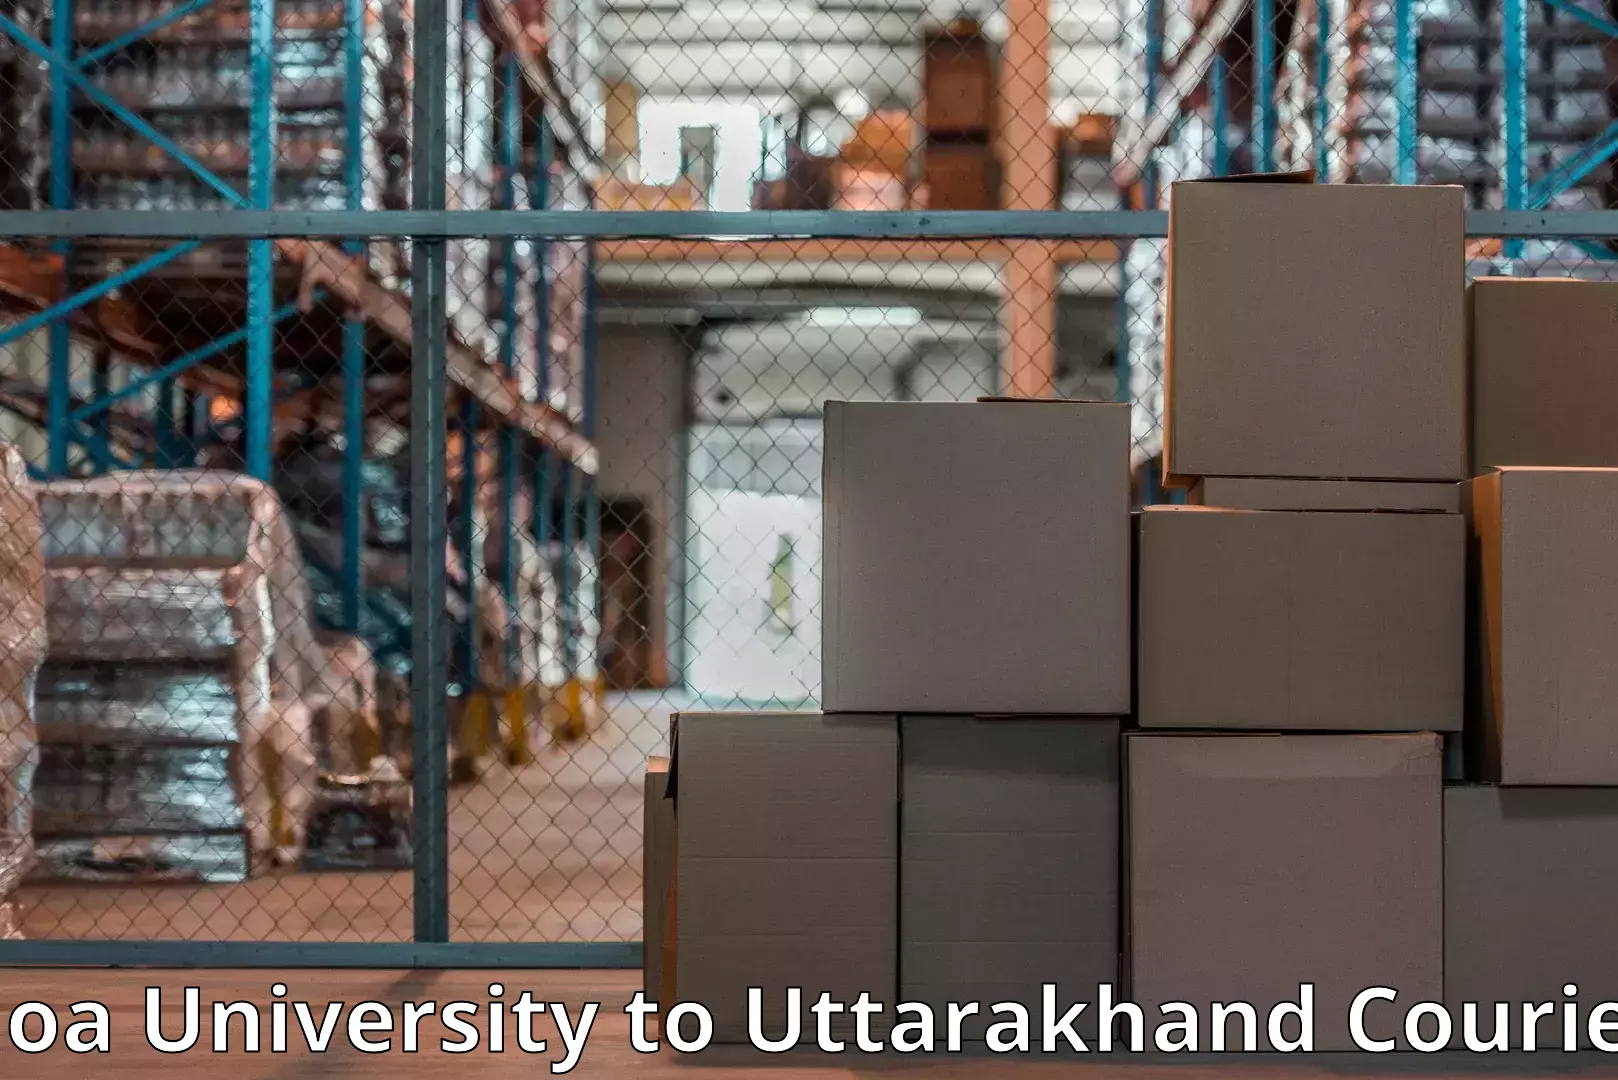 High-quality moving services in Goa University to Nainital